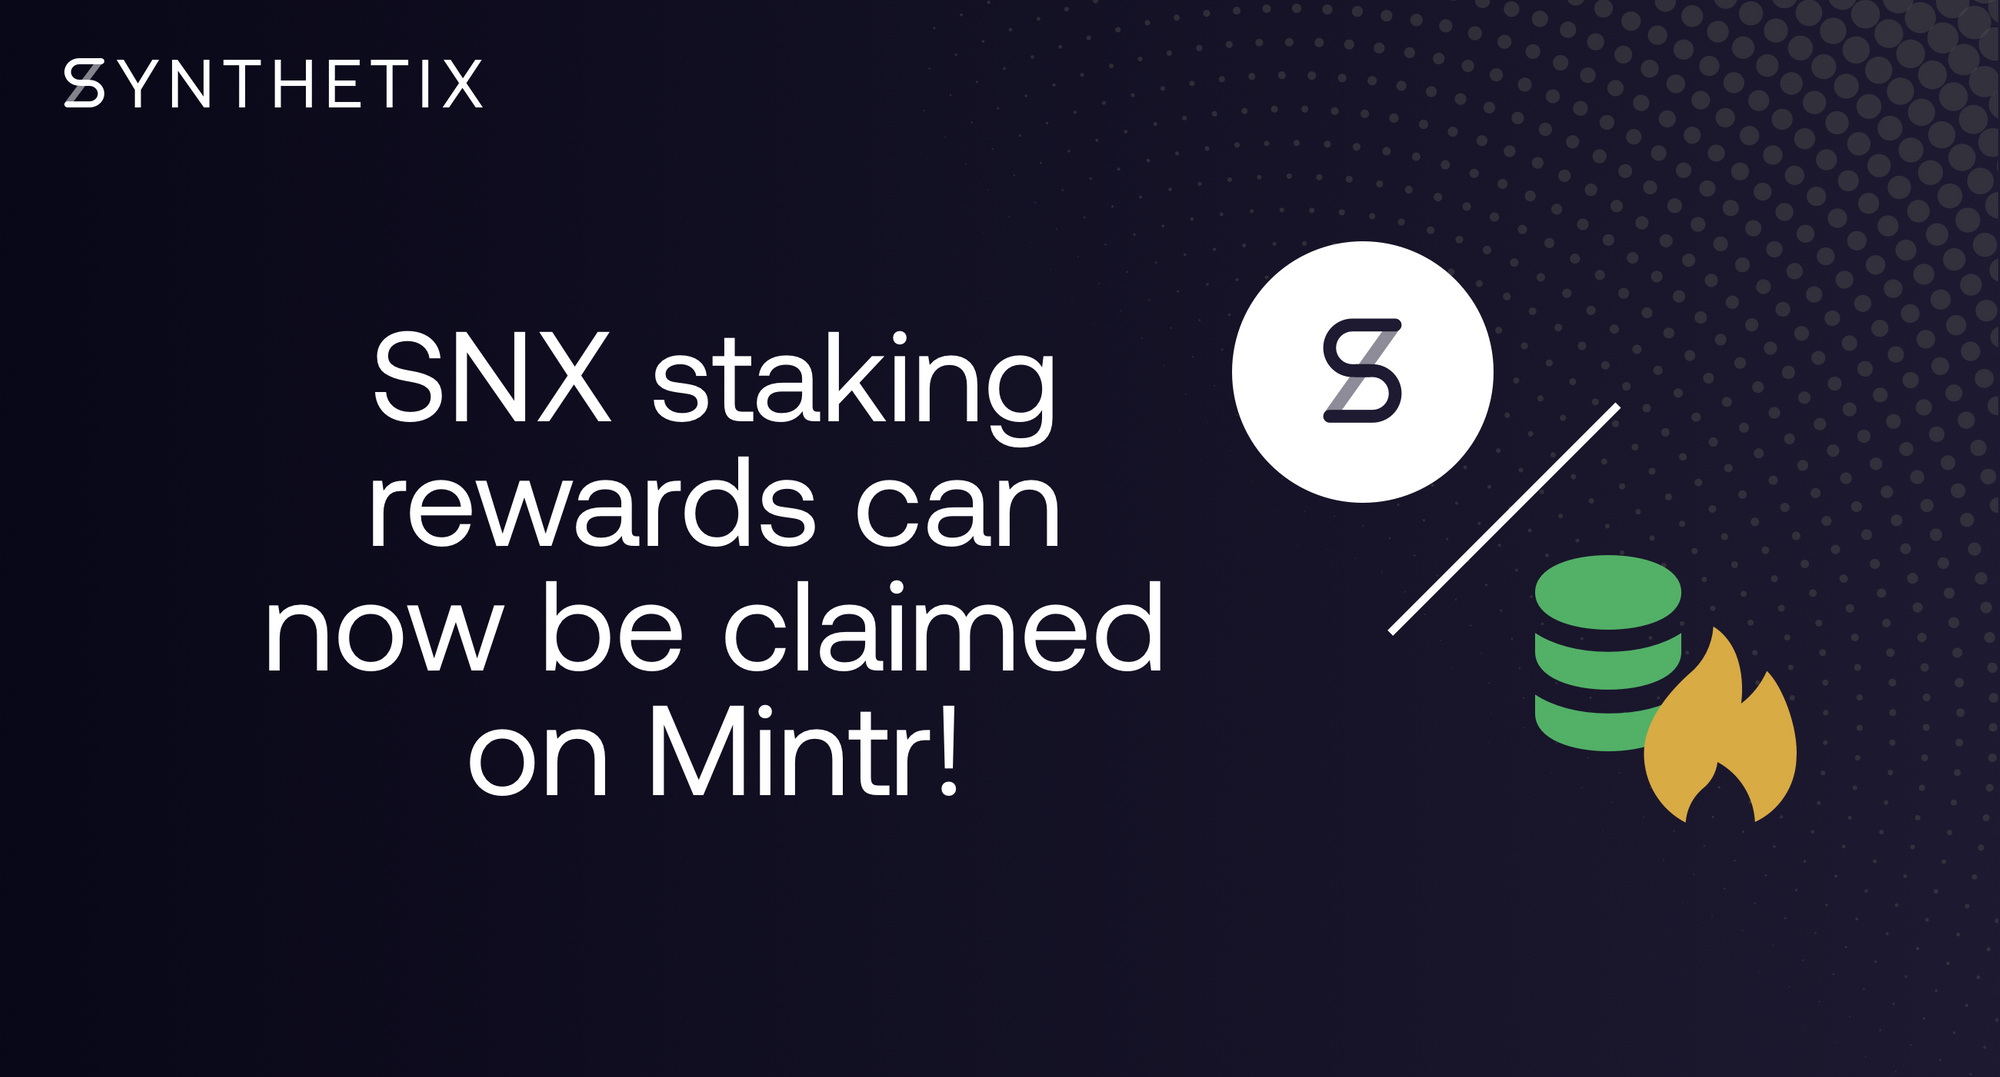 Synthetix SNX Staking & sUSD Minting Tutorial